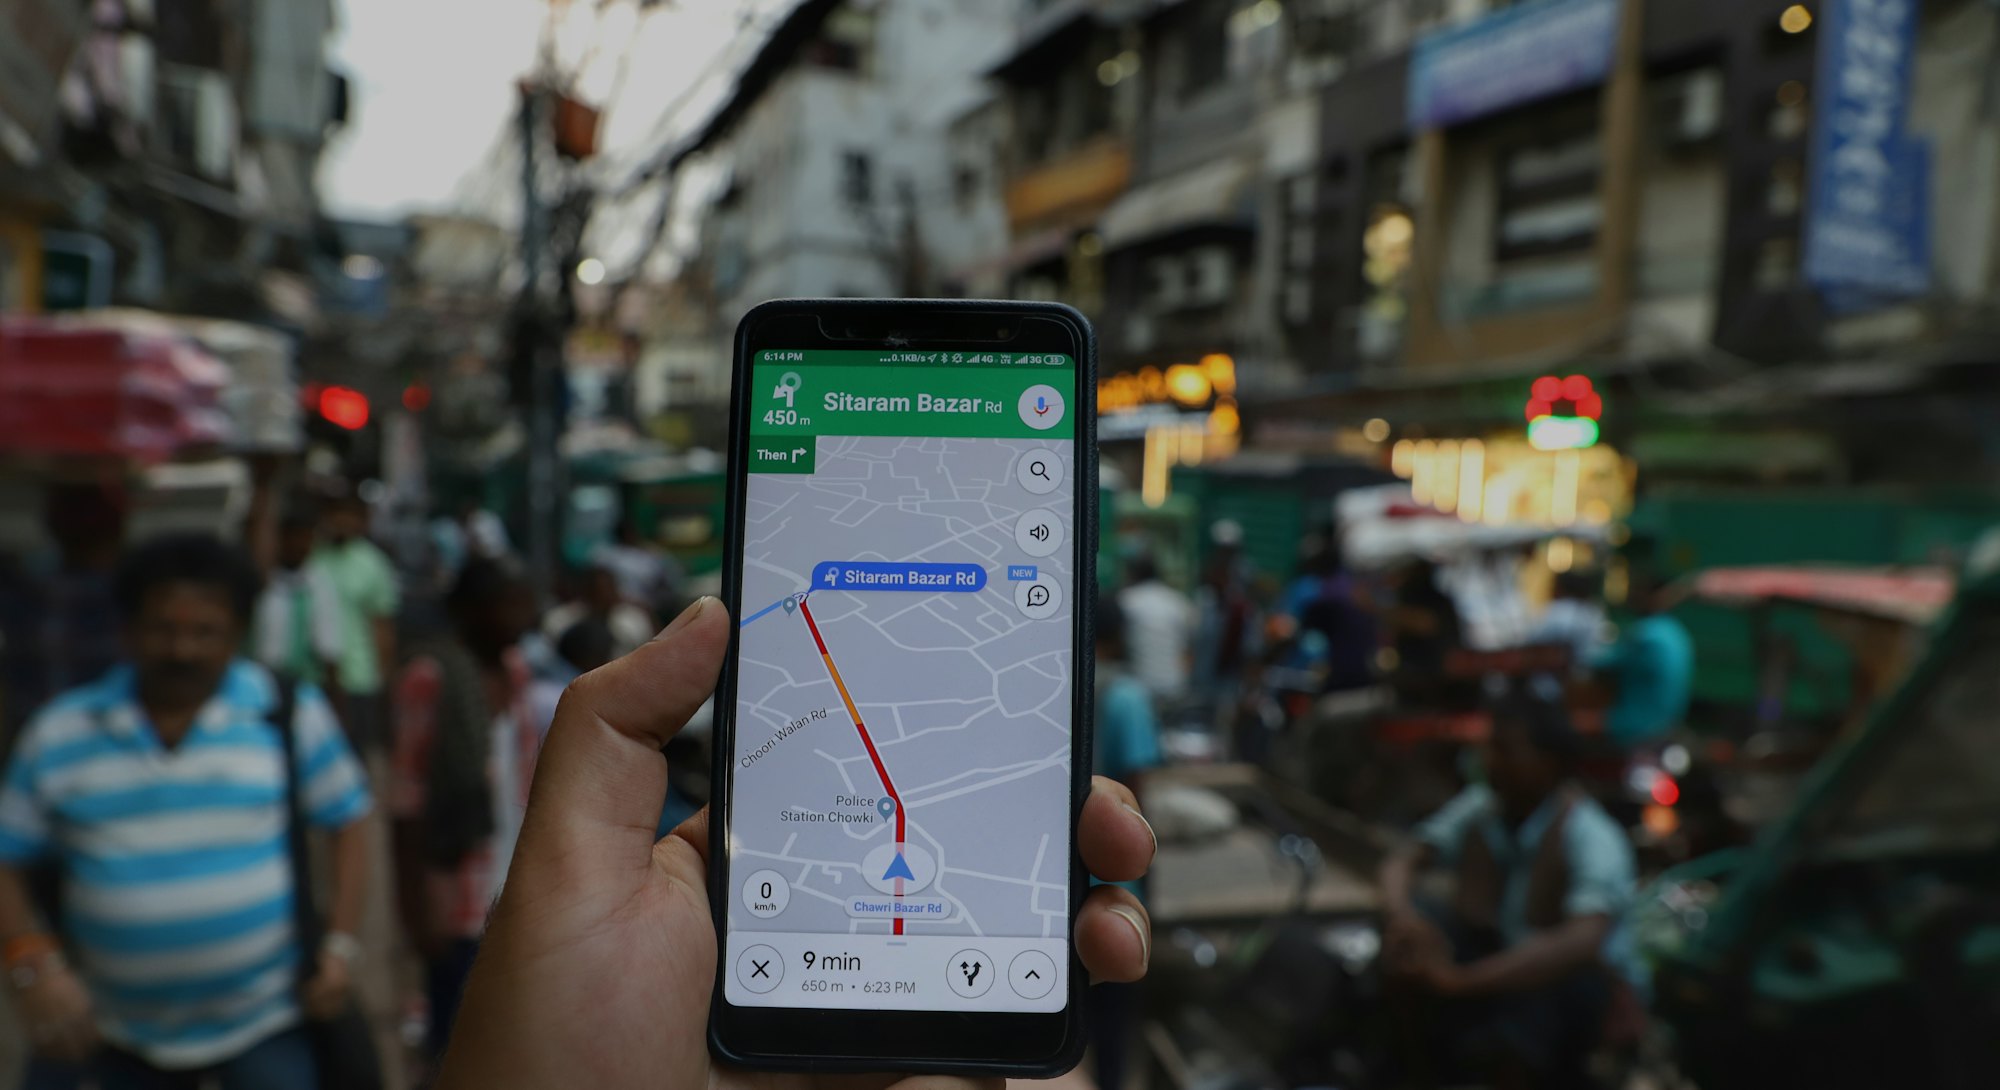 A user searches his destination via Google Maps in New Delhi India on 02 September 2019 (Photo by Nasir Kachroo/NurPhoto via Getty Images)